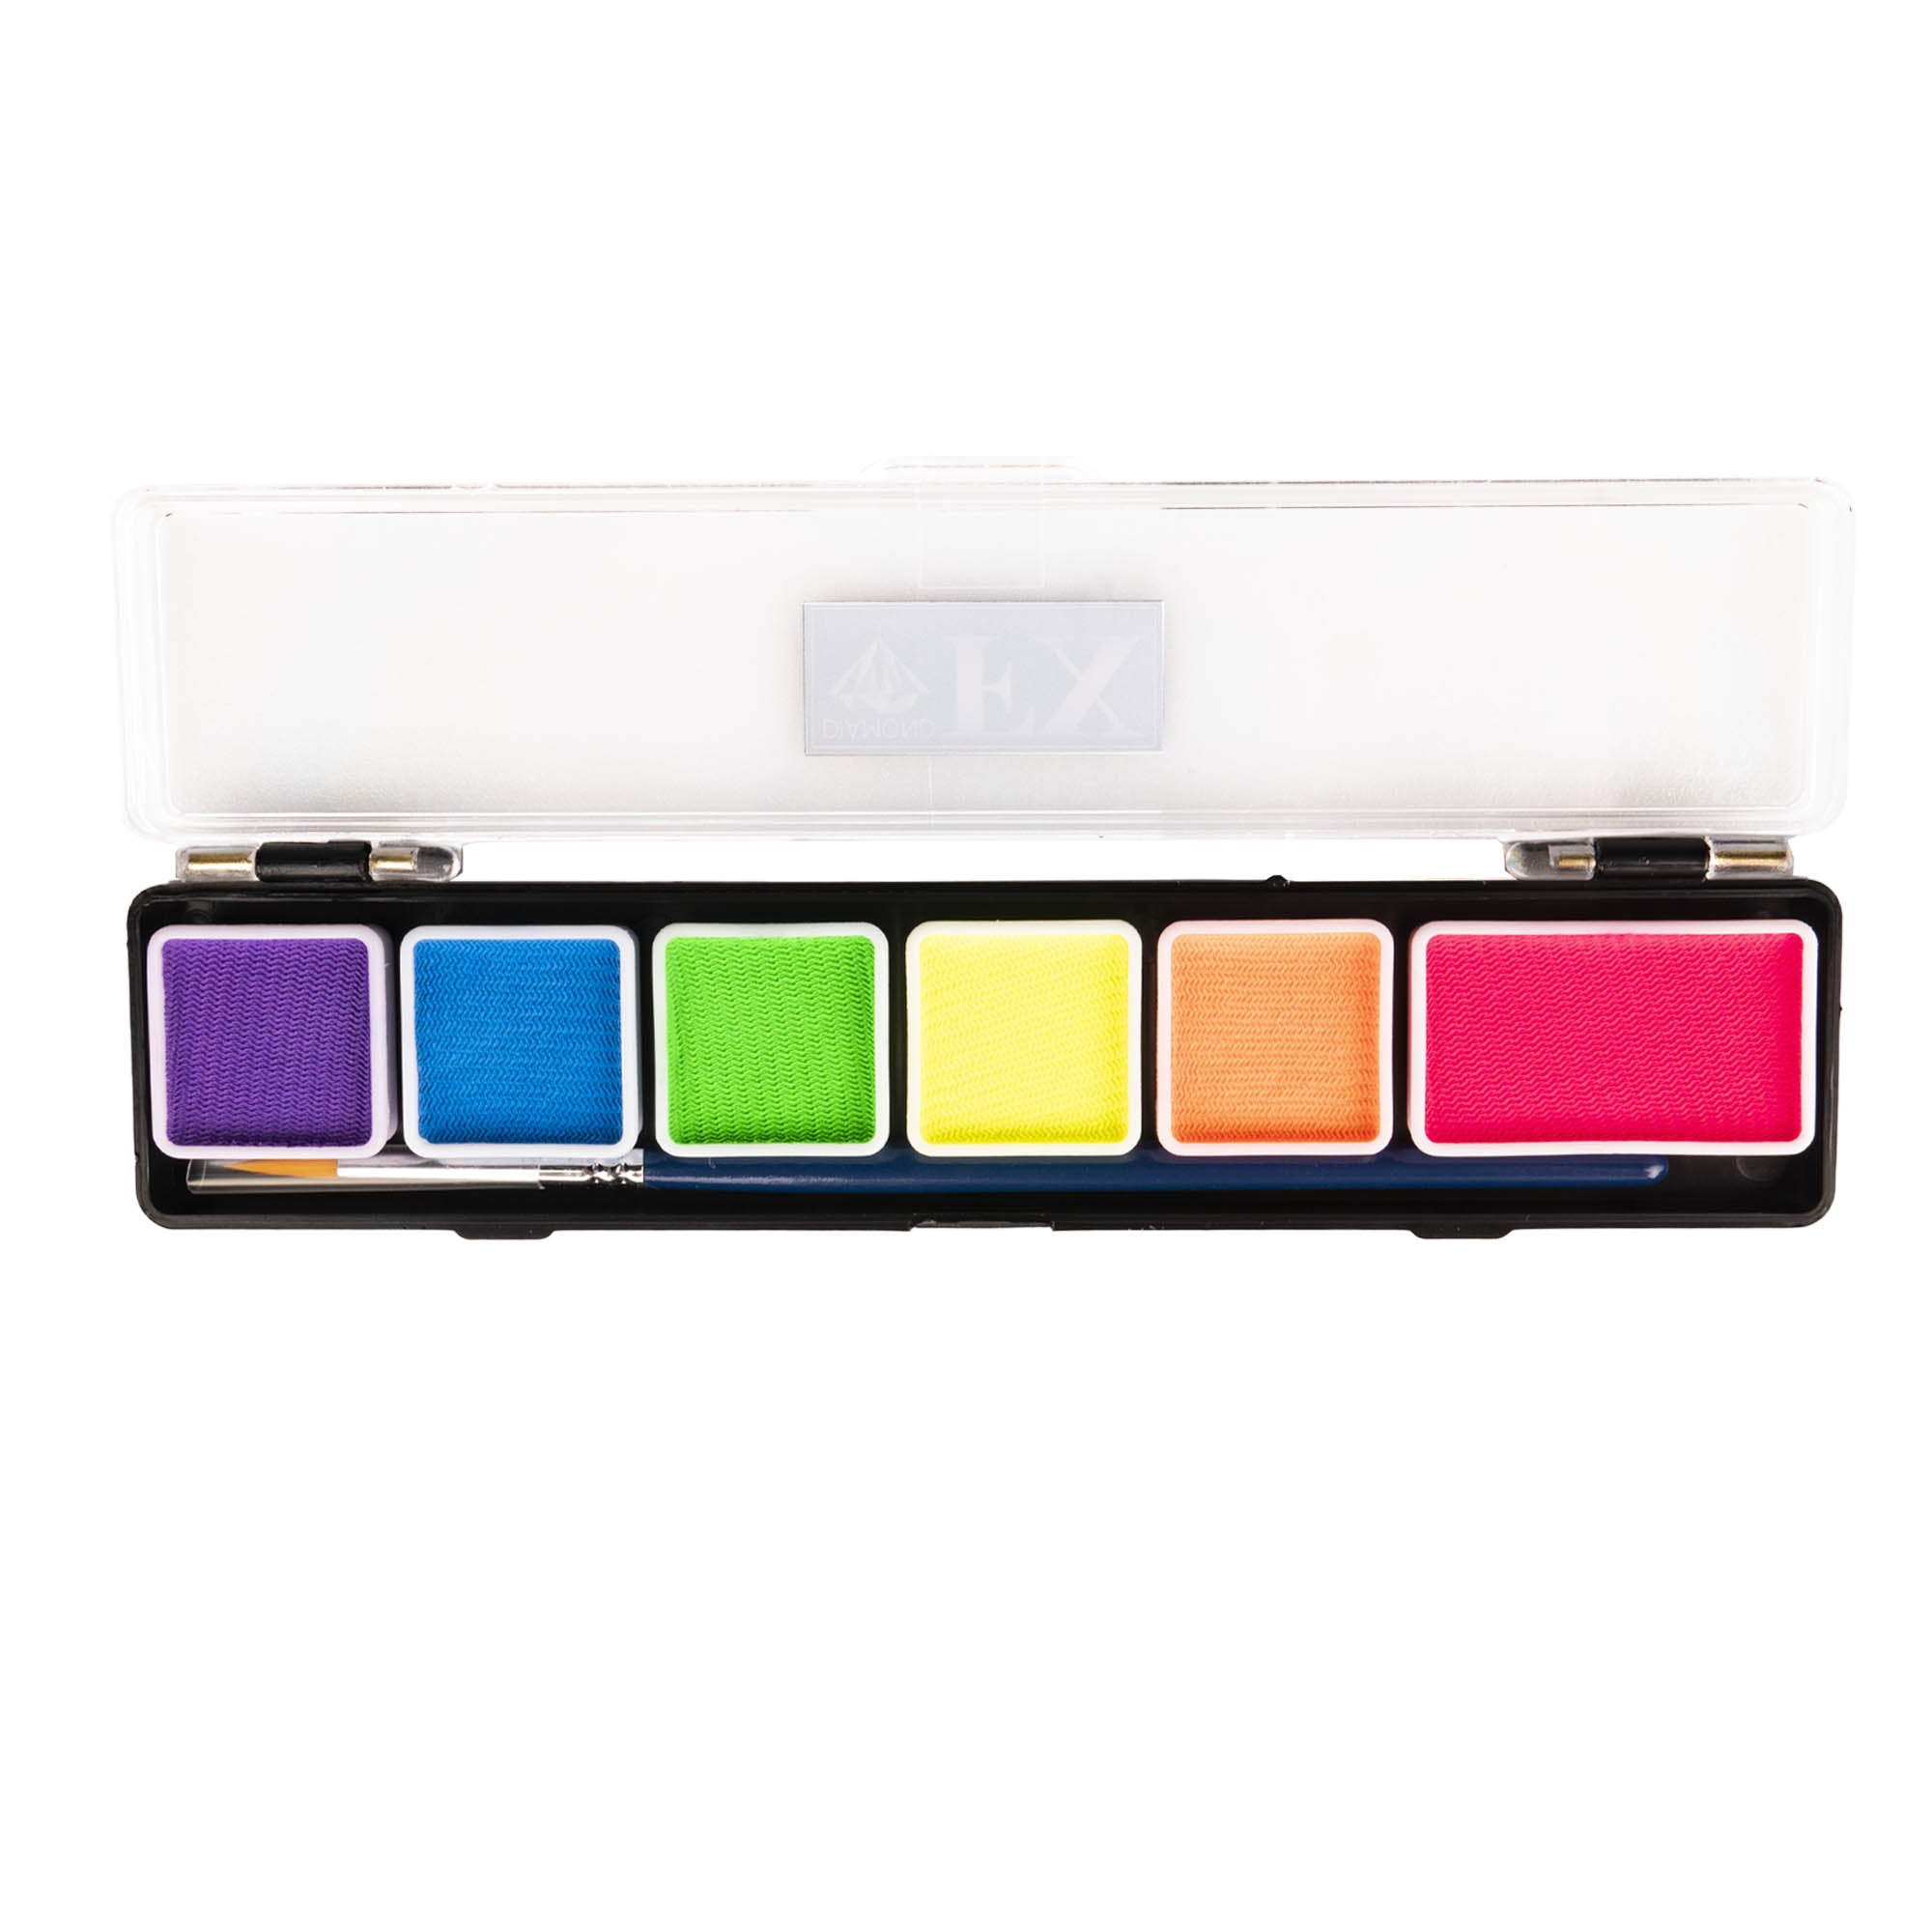 Diamond FX mini 6 colour neon palette with the lid open on a white background